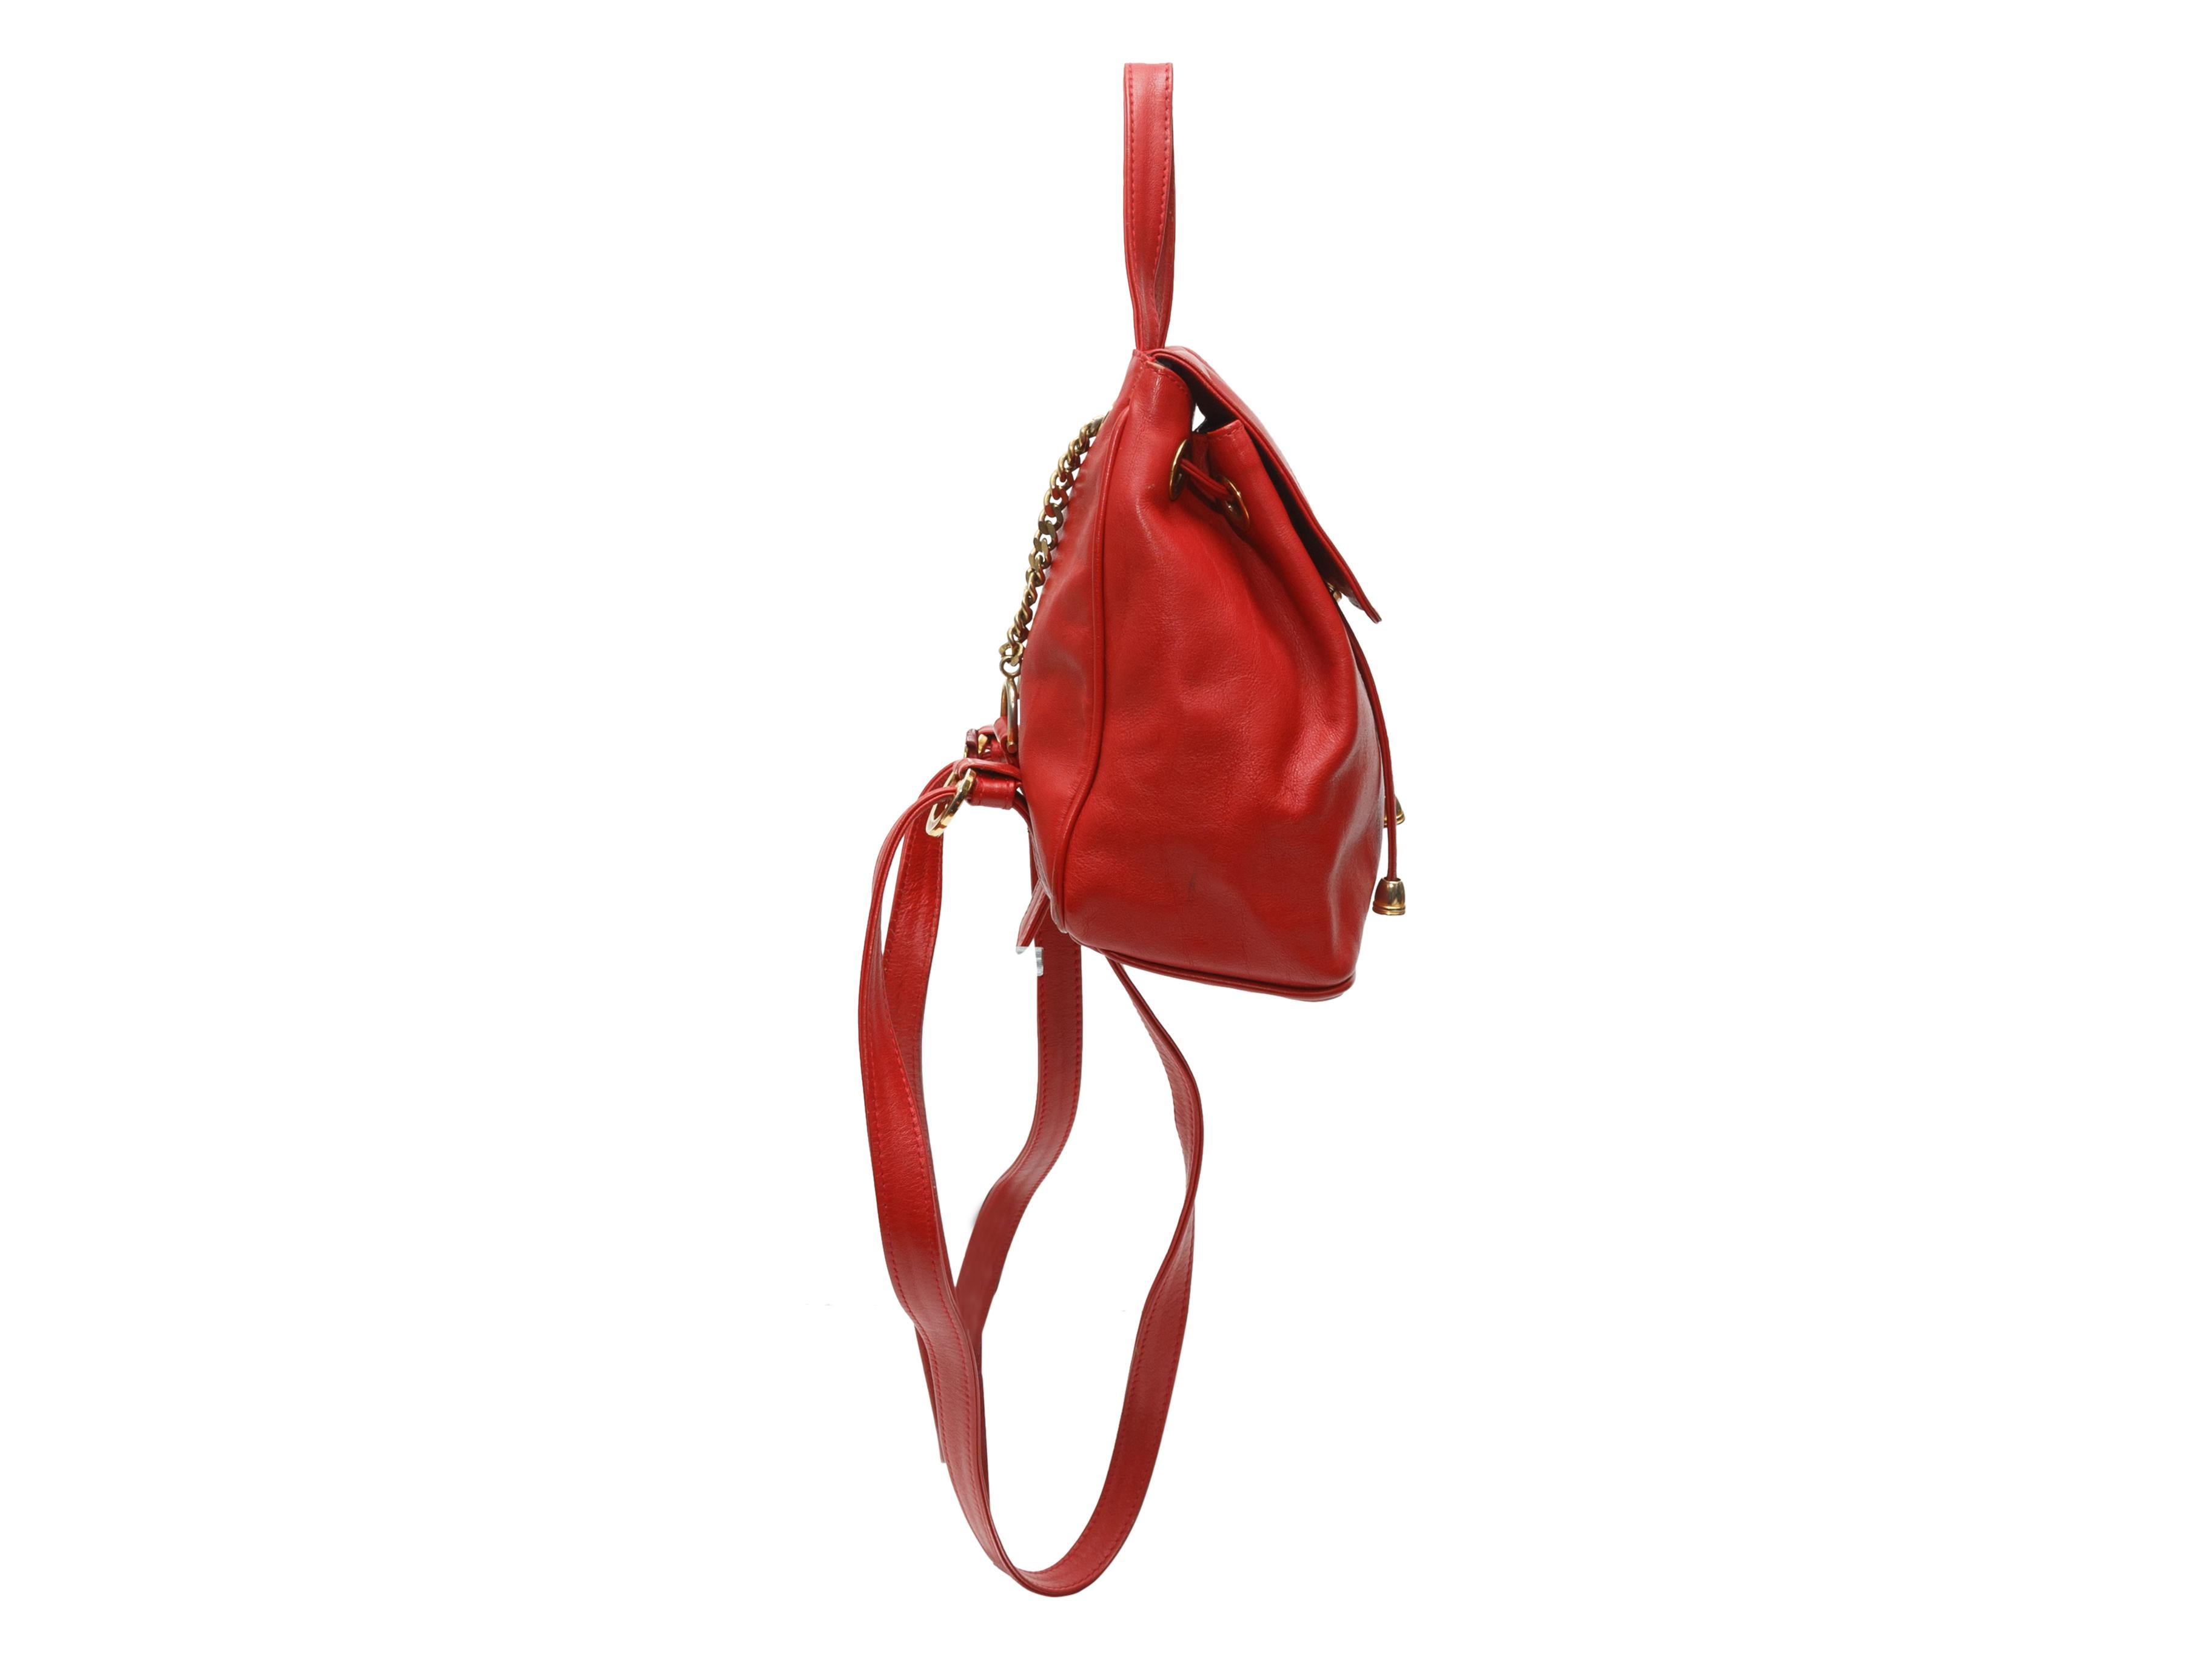 Product details: Red leather mini backpack by Paloma Picasso. Gold-tone hardware. Adjustable shoulder straps. Drawstring at interior top. Flap closure at front. 9